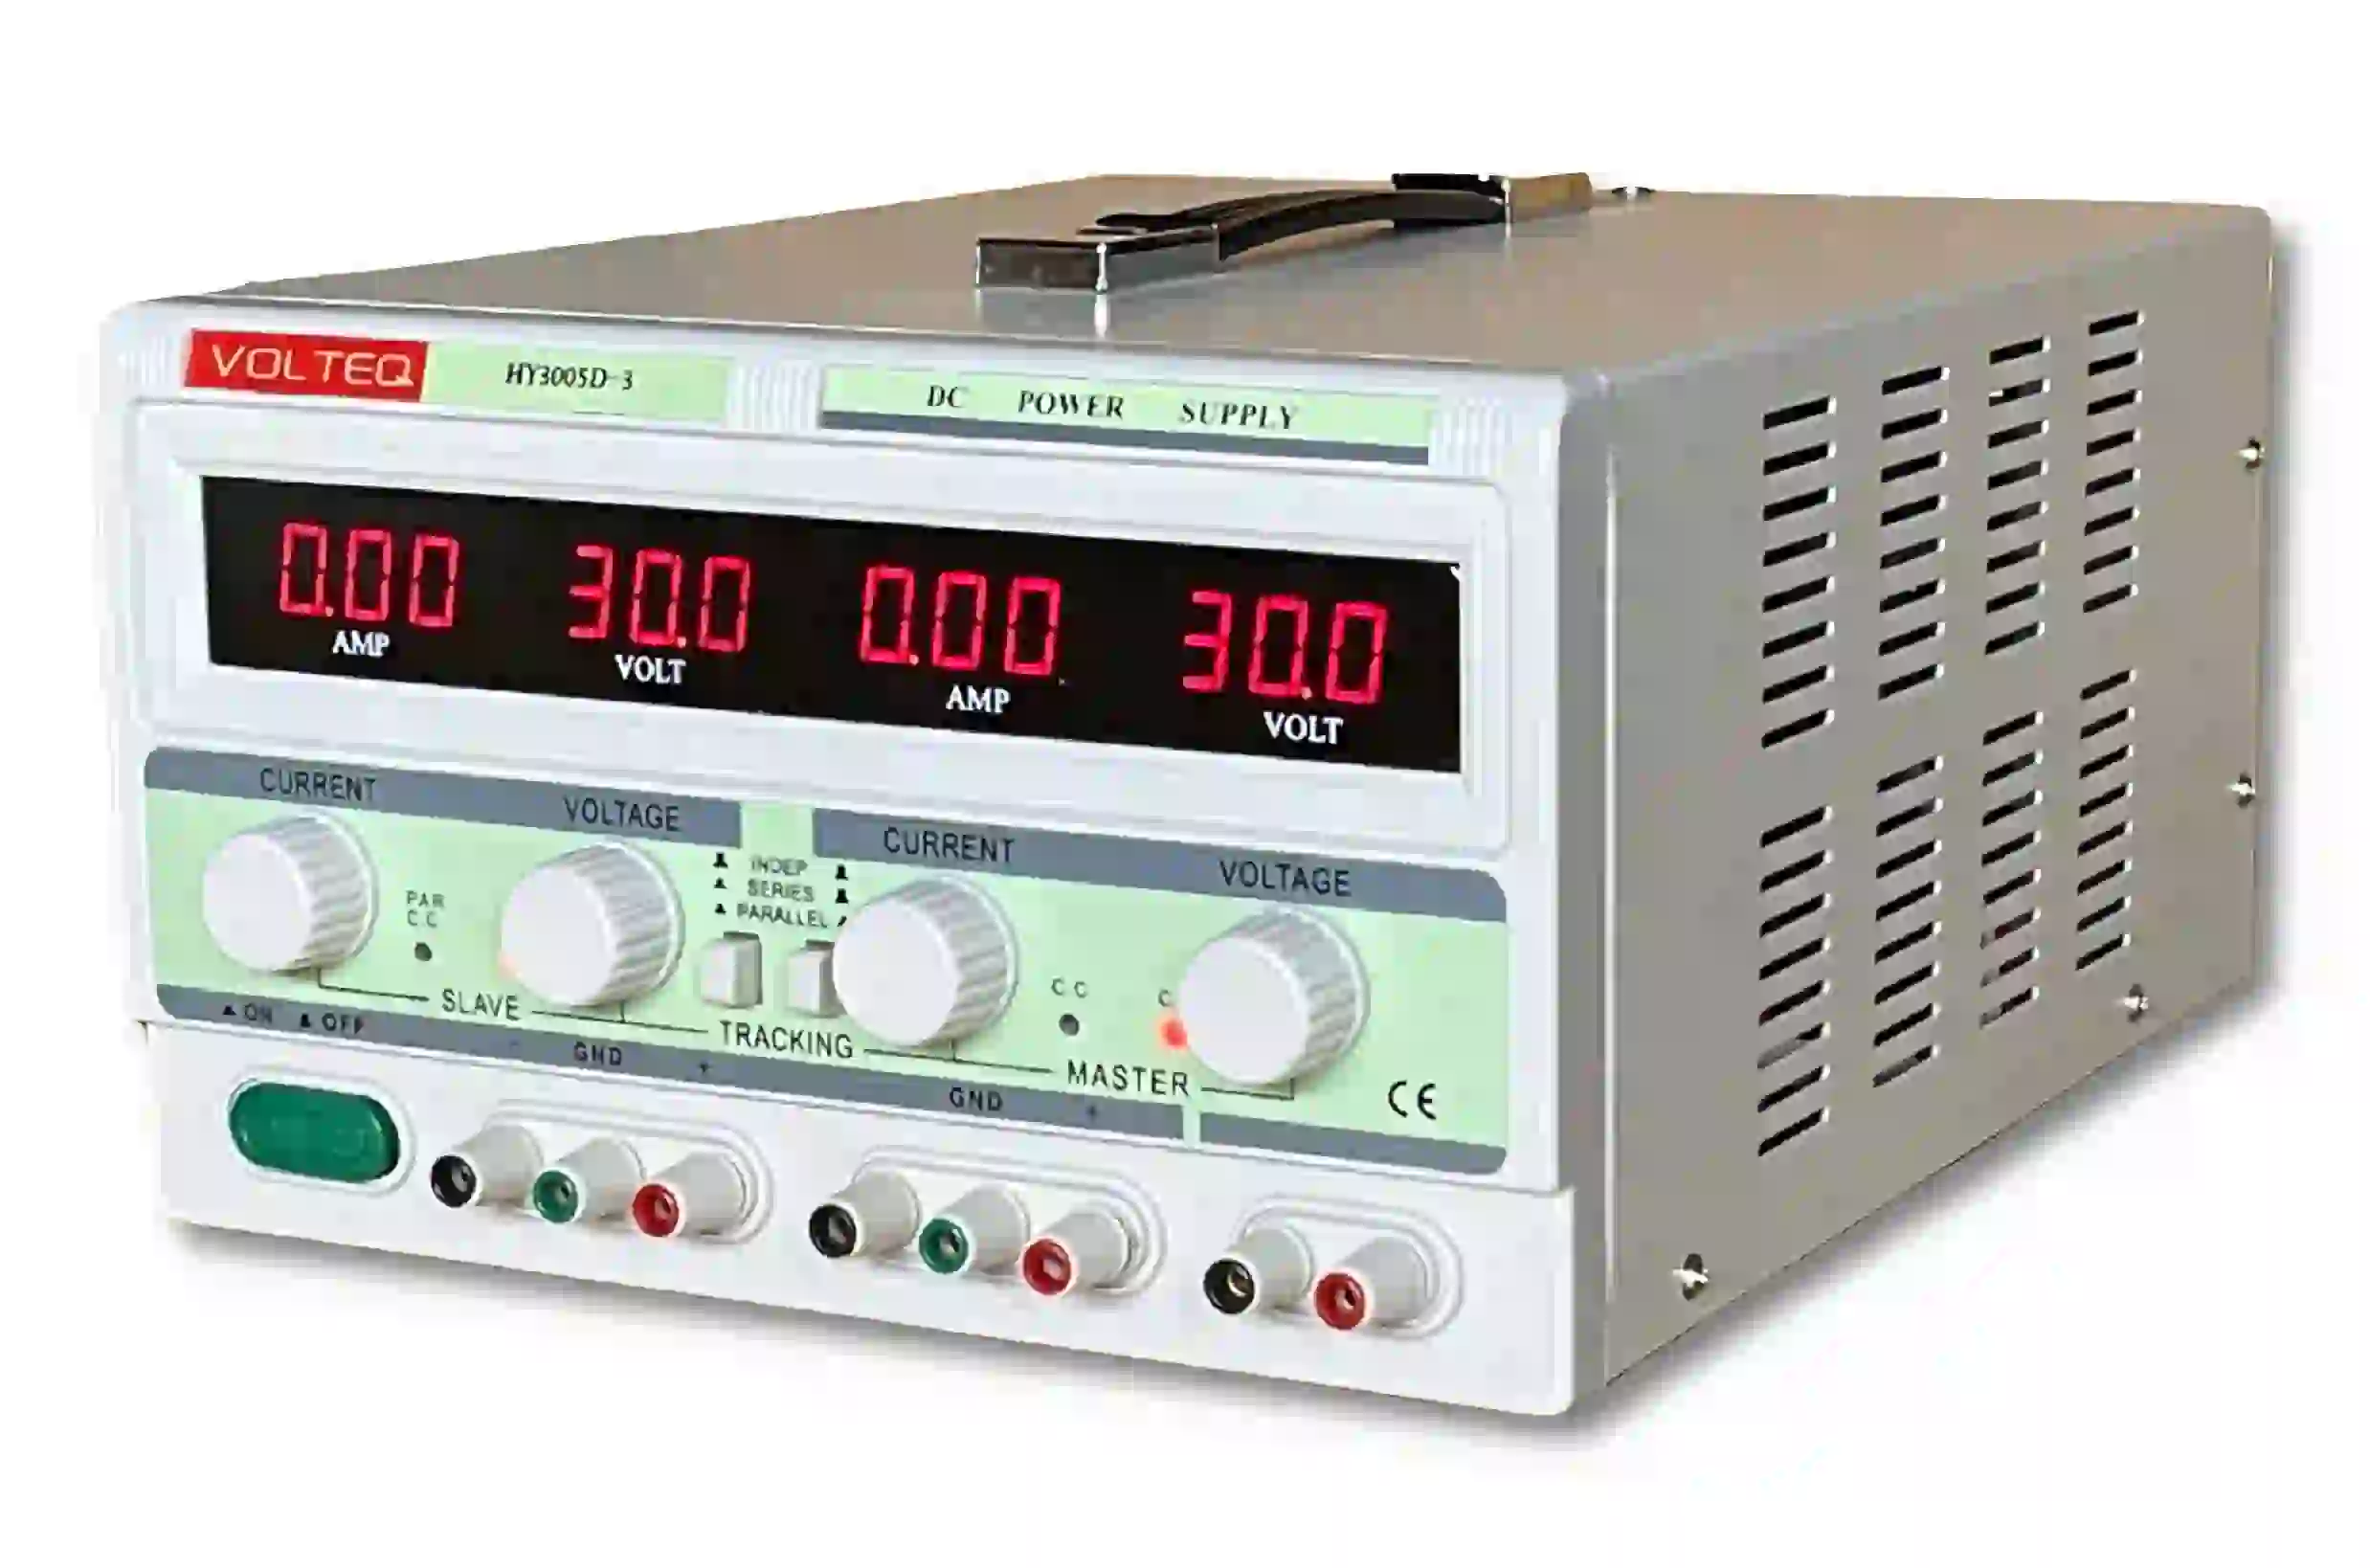 New Model! 30 V 5A Triple Linear Variable DC POWER SUPPLY HY3005D